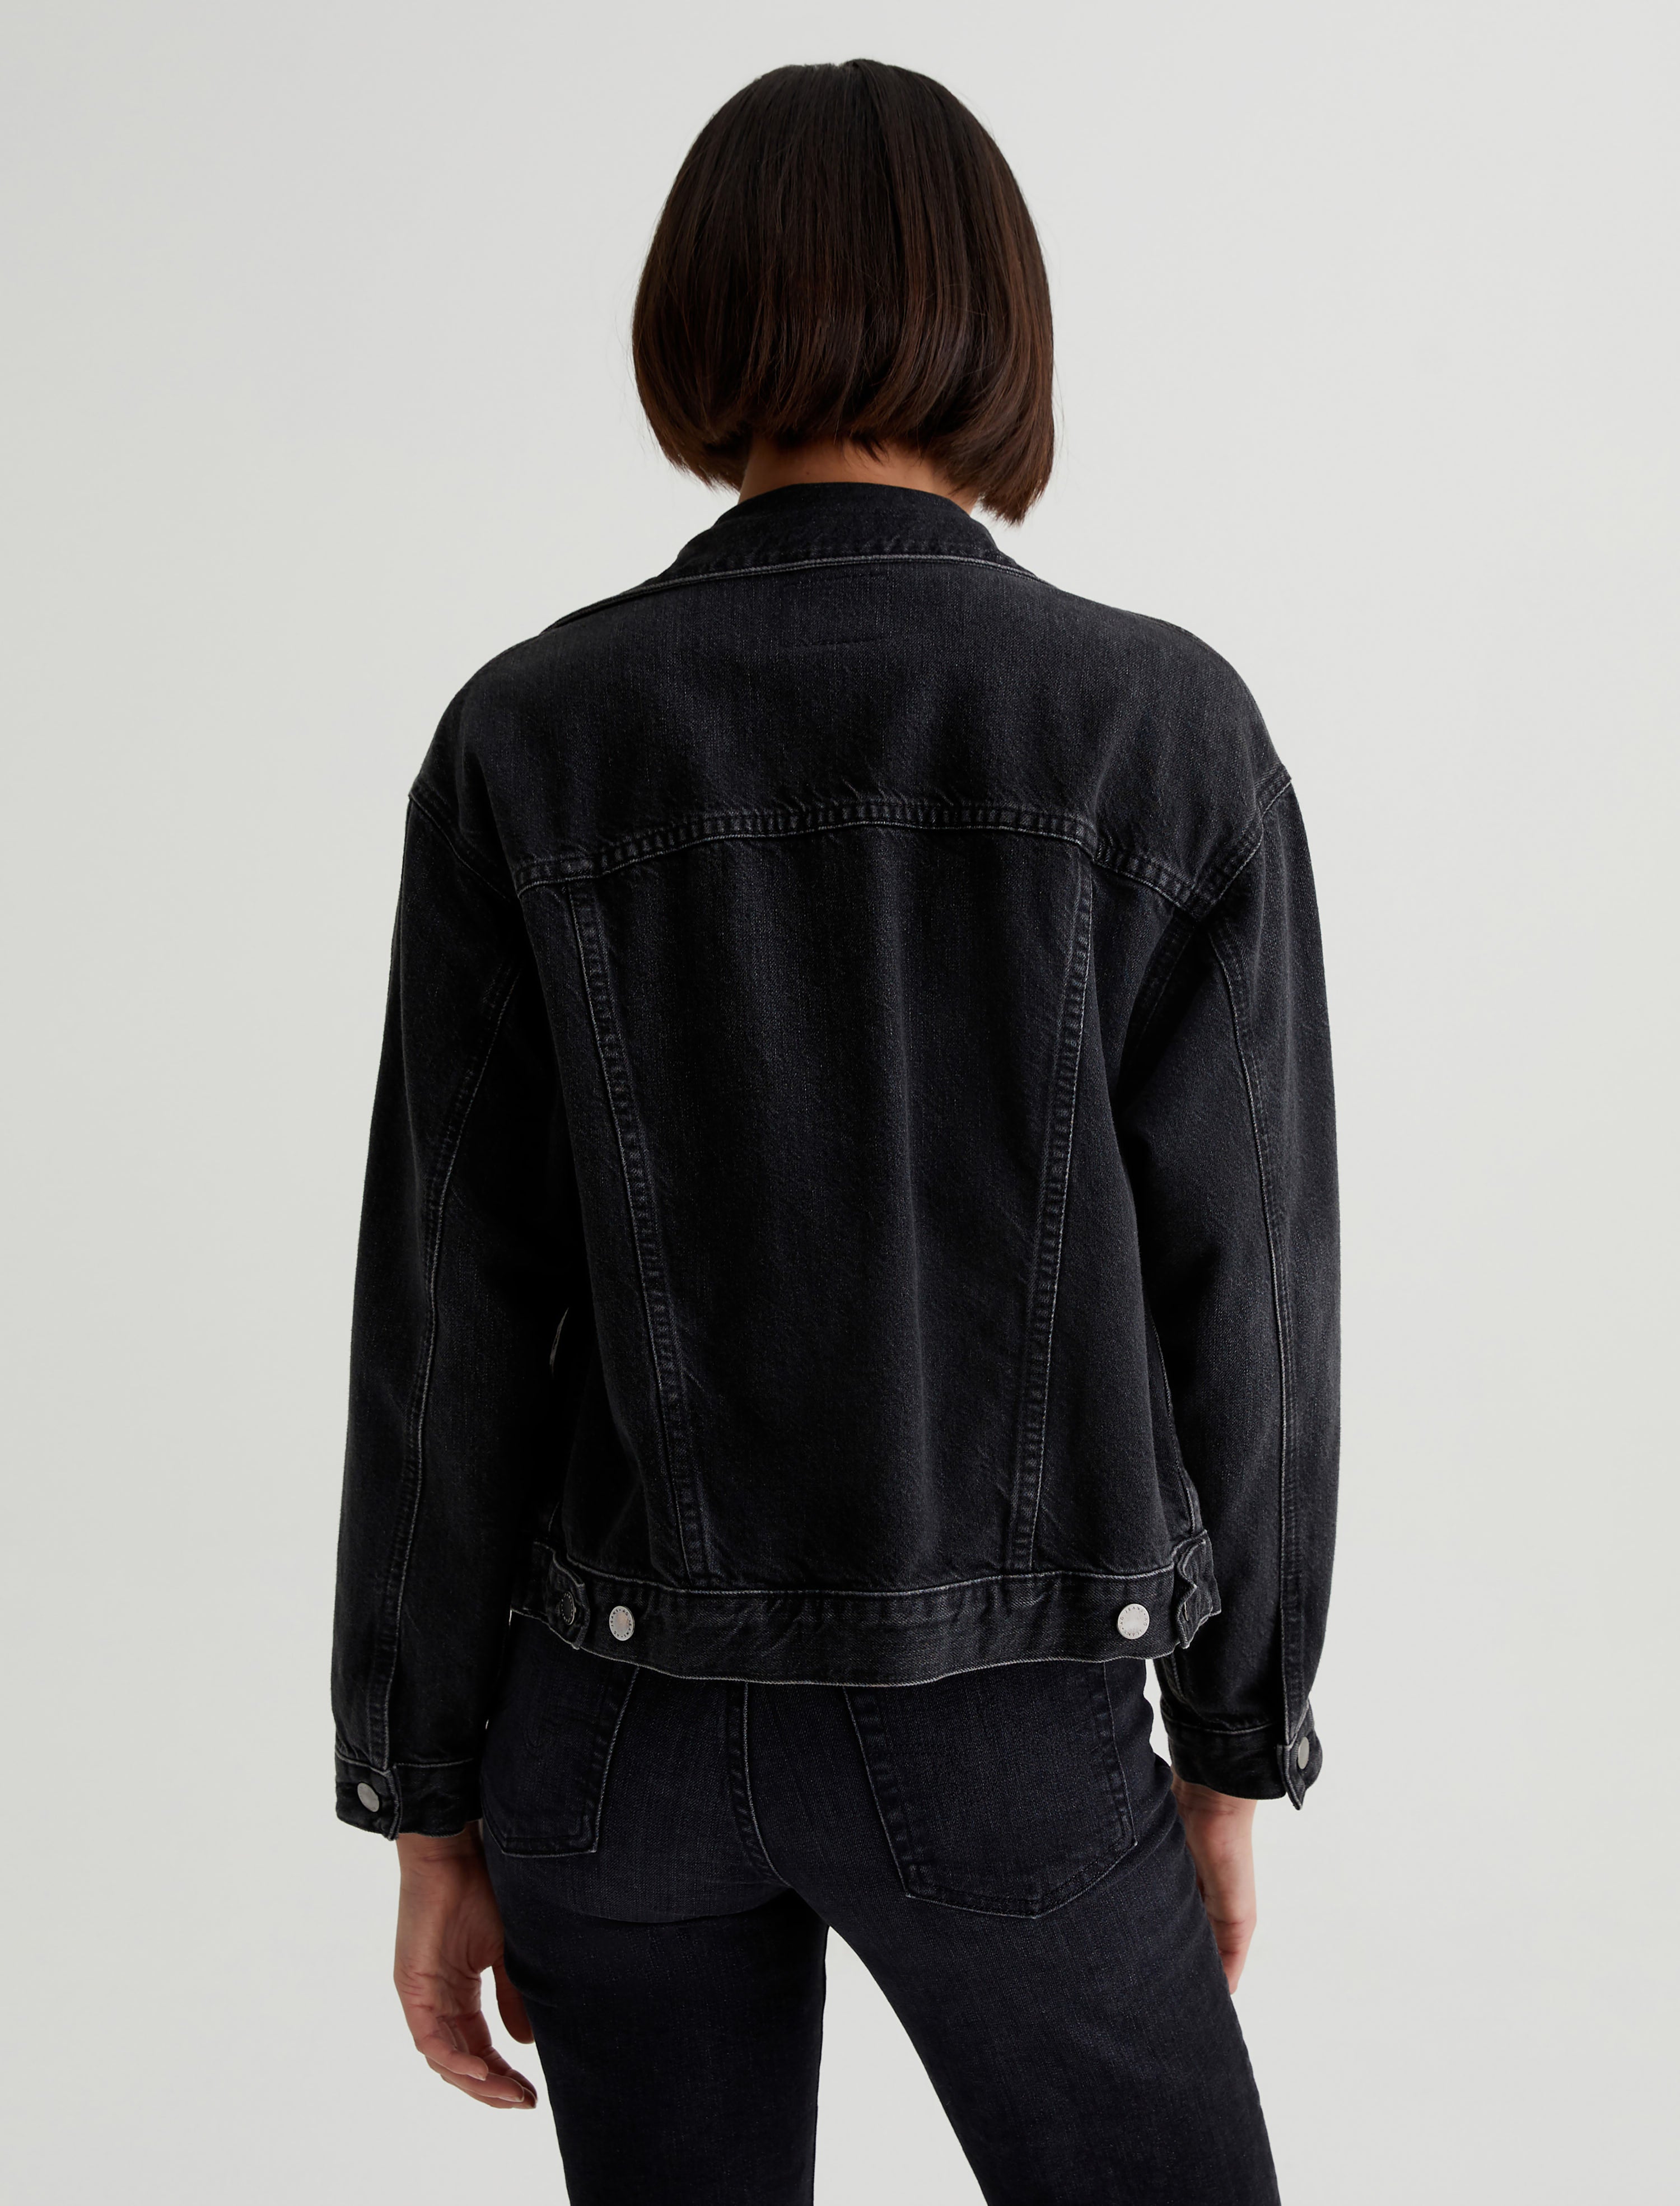 Womens Robyn Jacket City View at AG Jeans Official Store